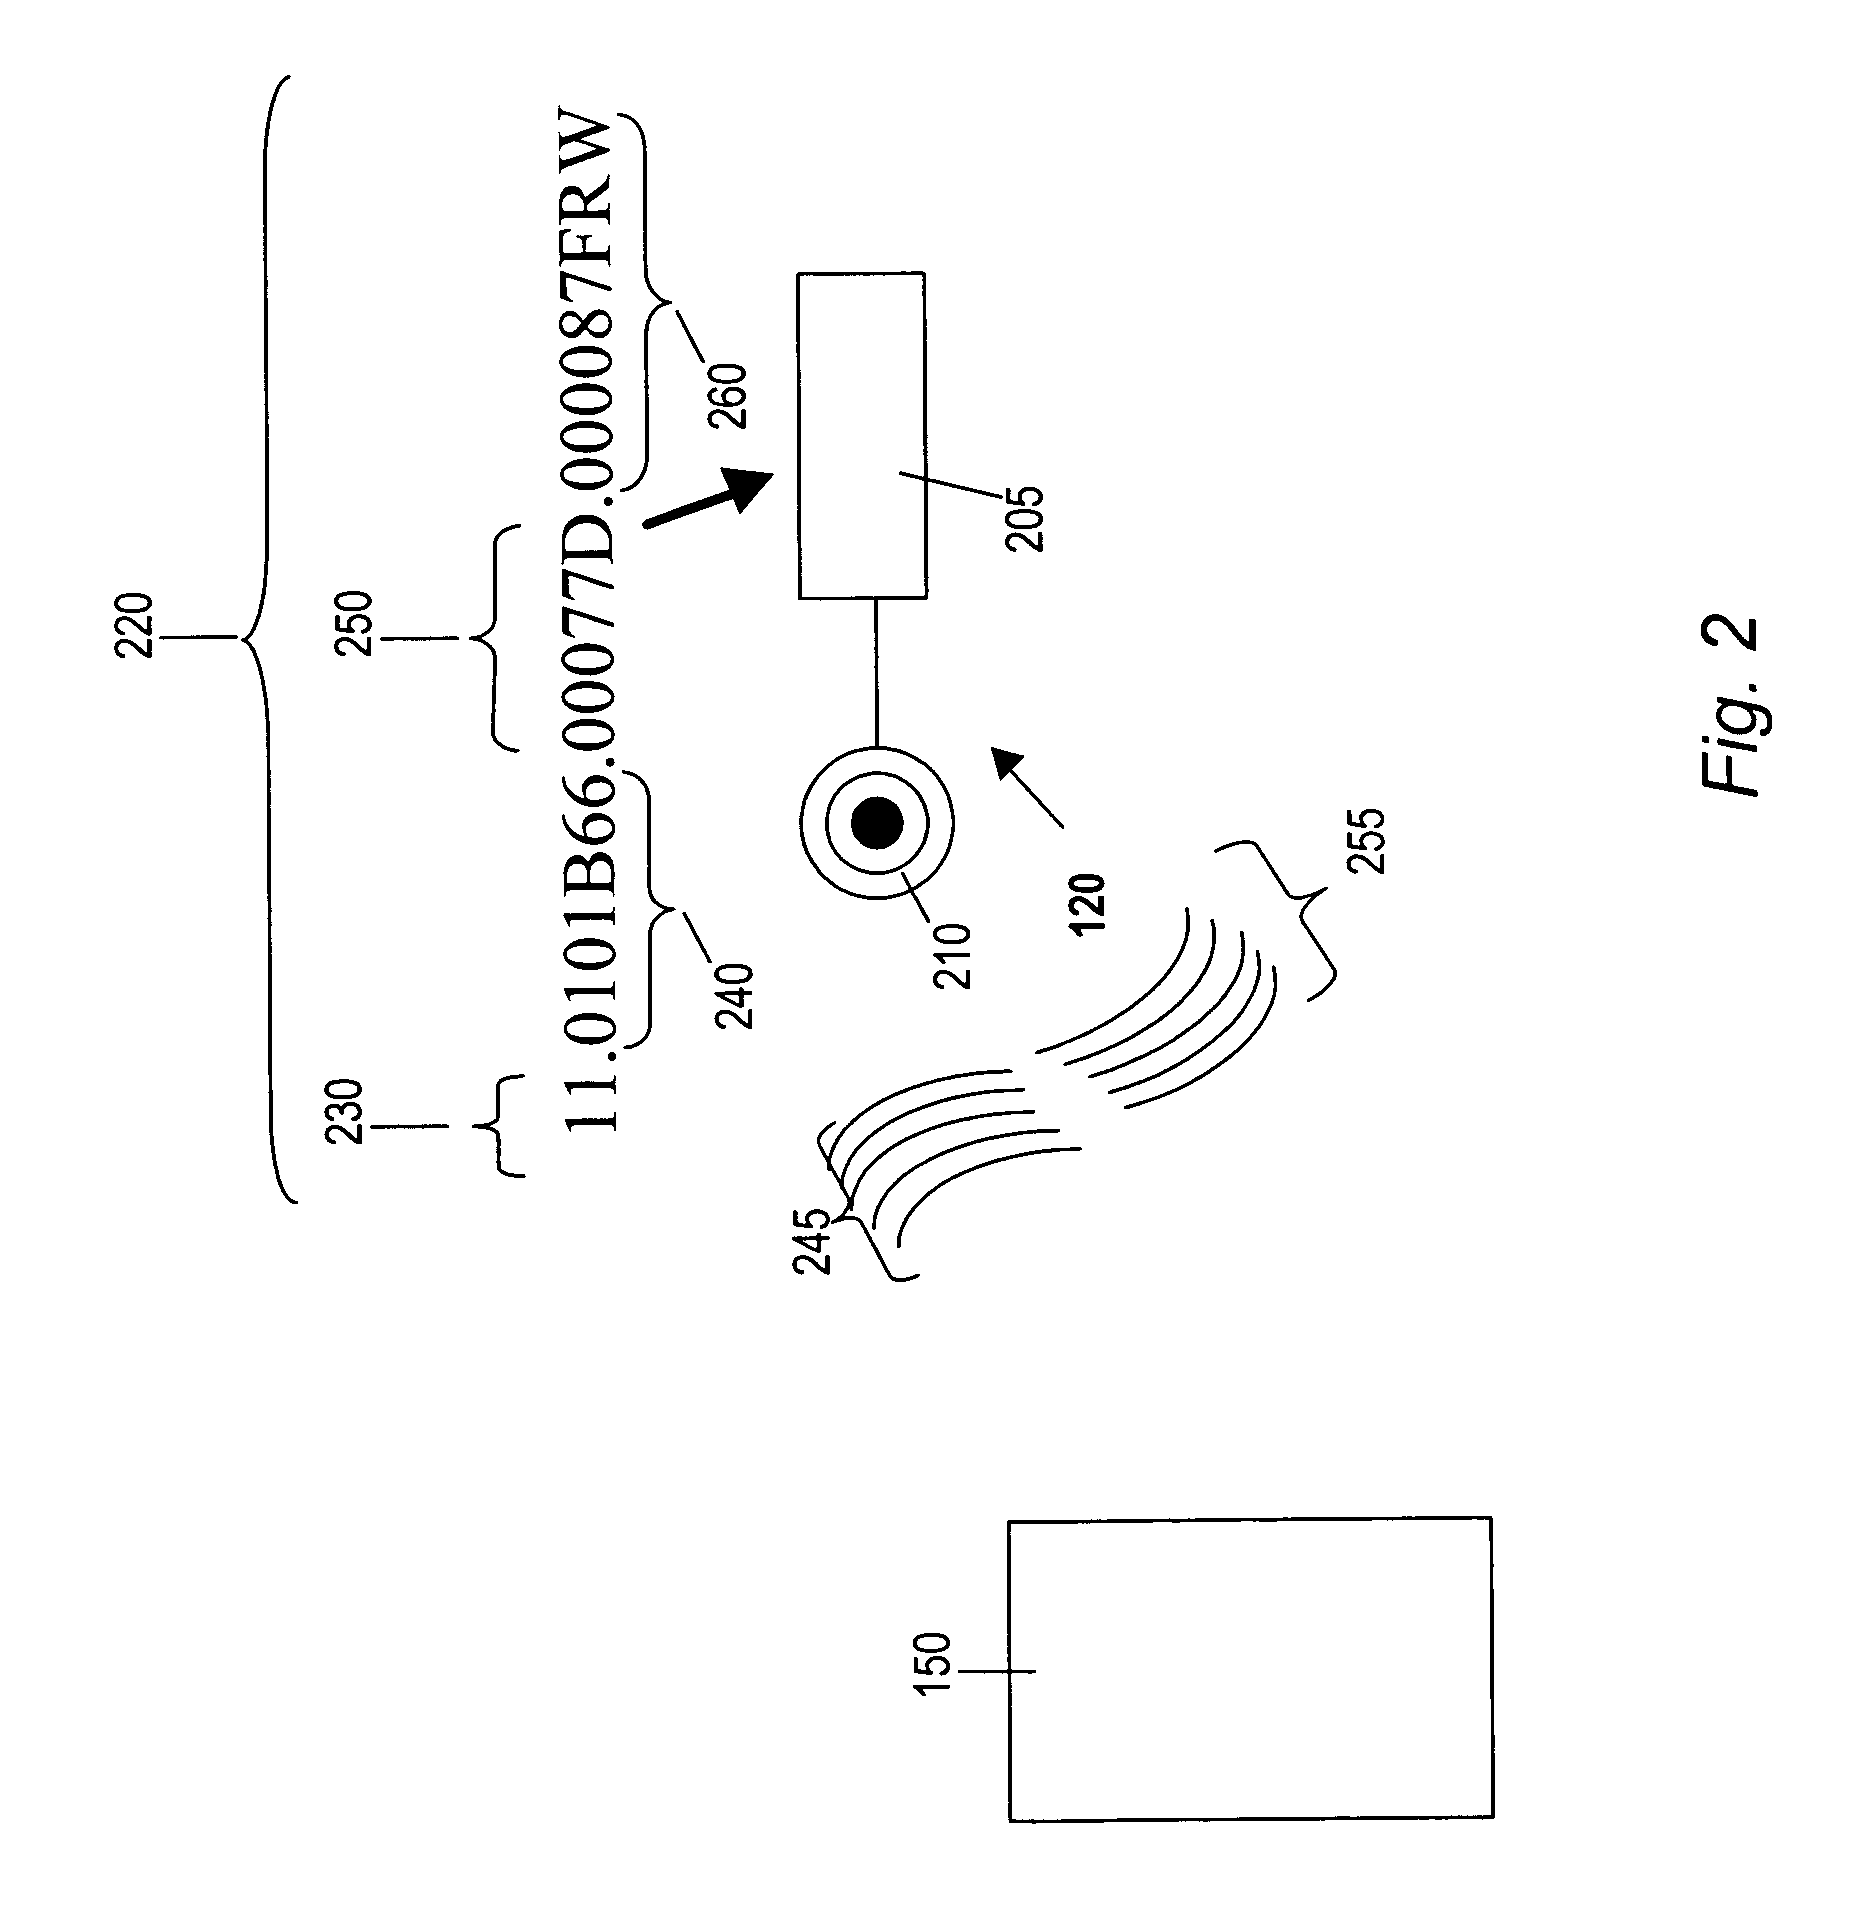 Location detection and network awareness for multi-mode/multi-radio mobile devices